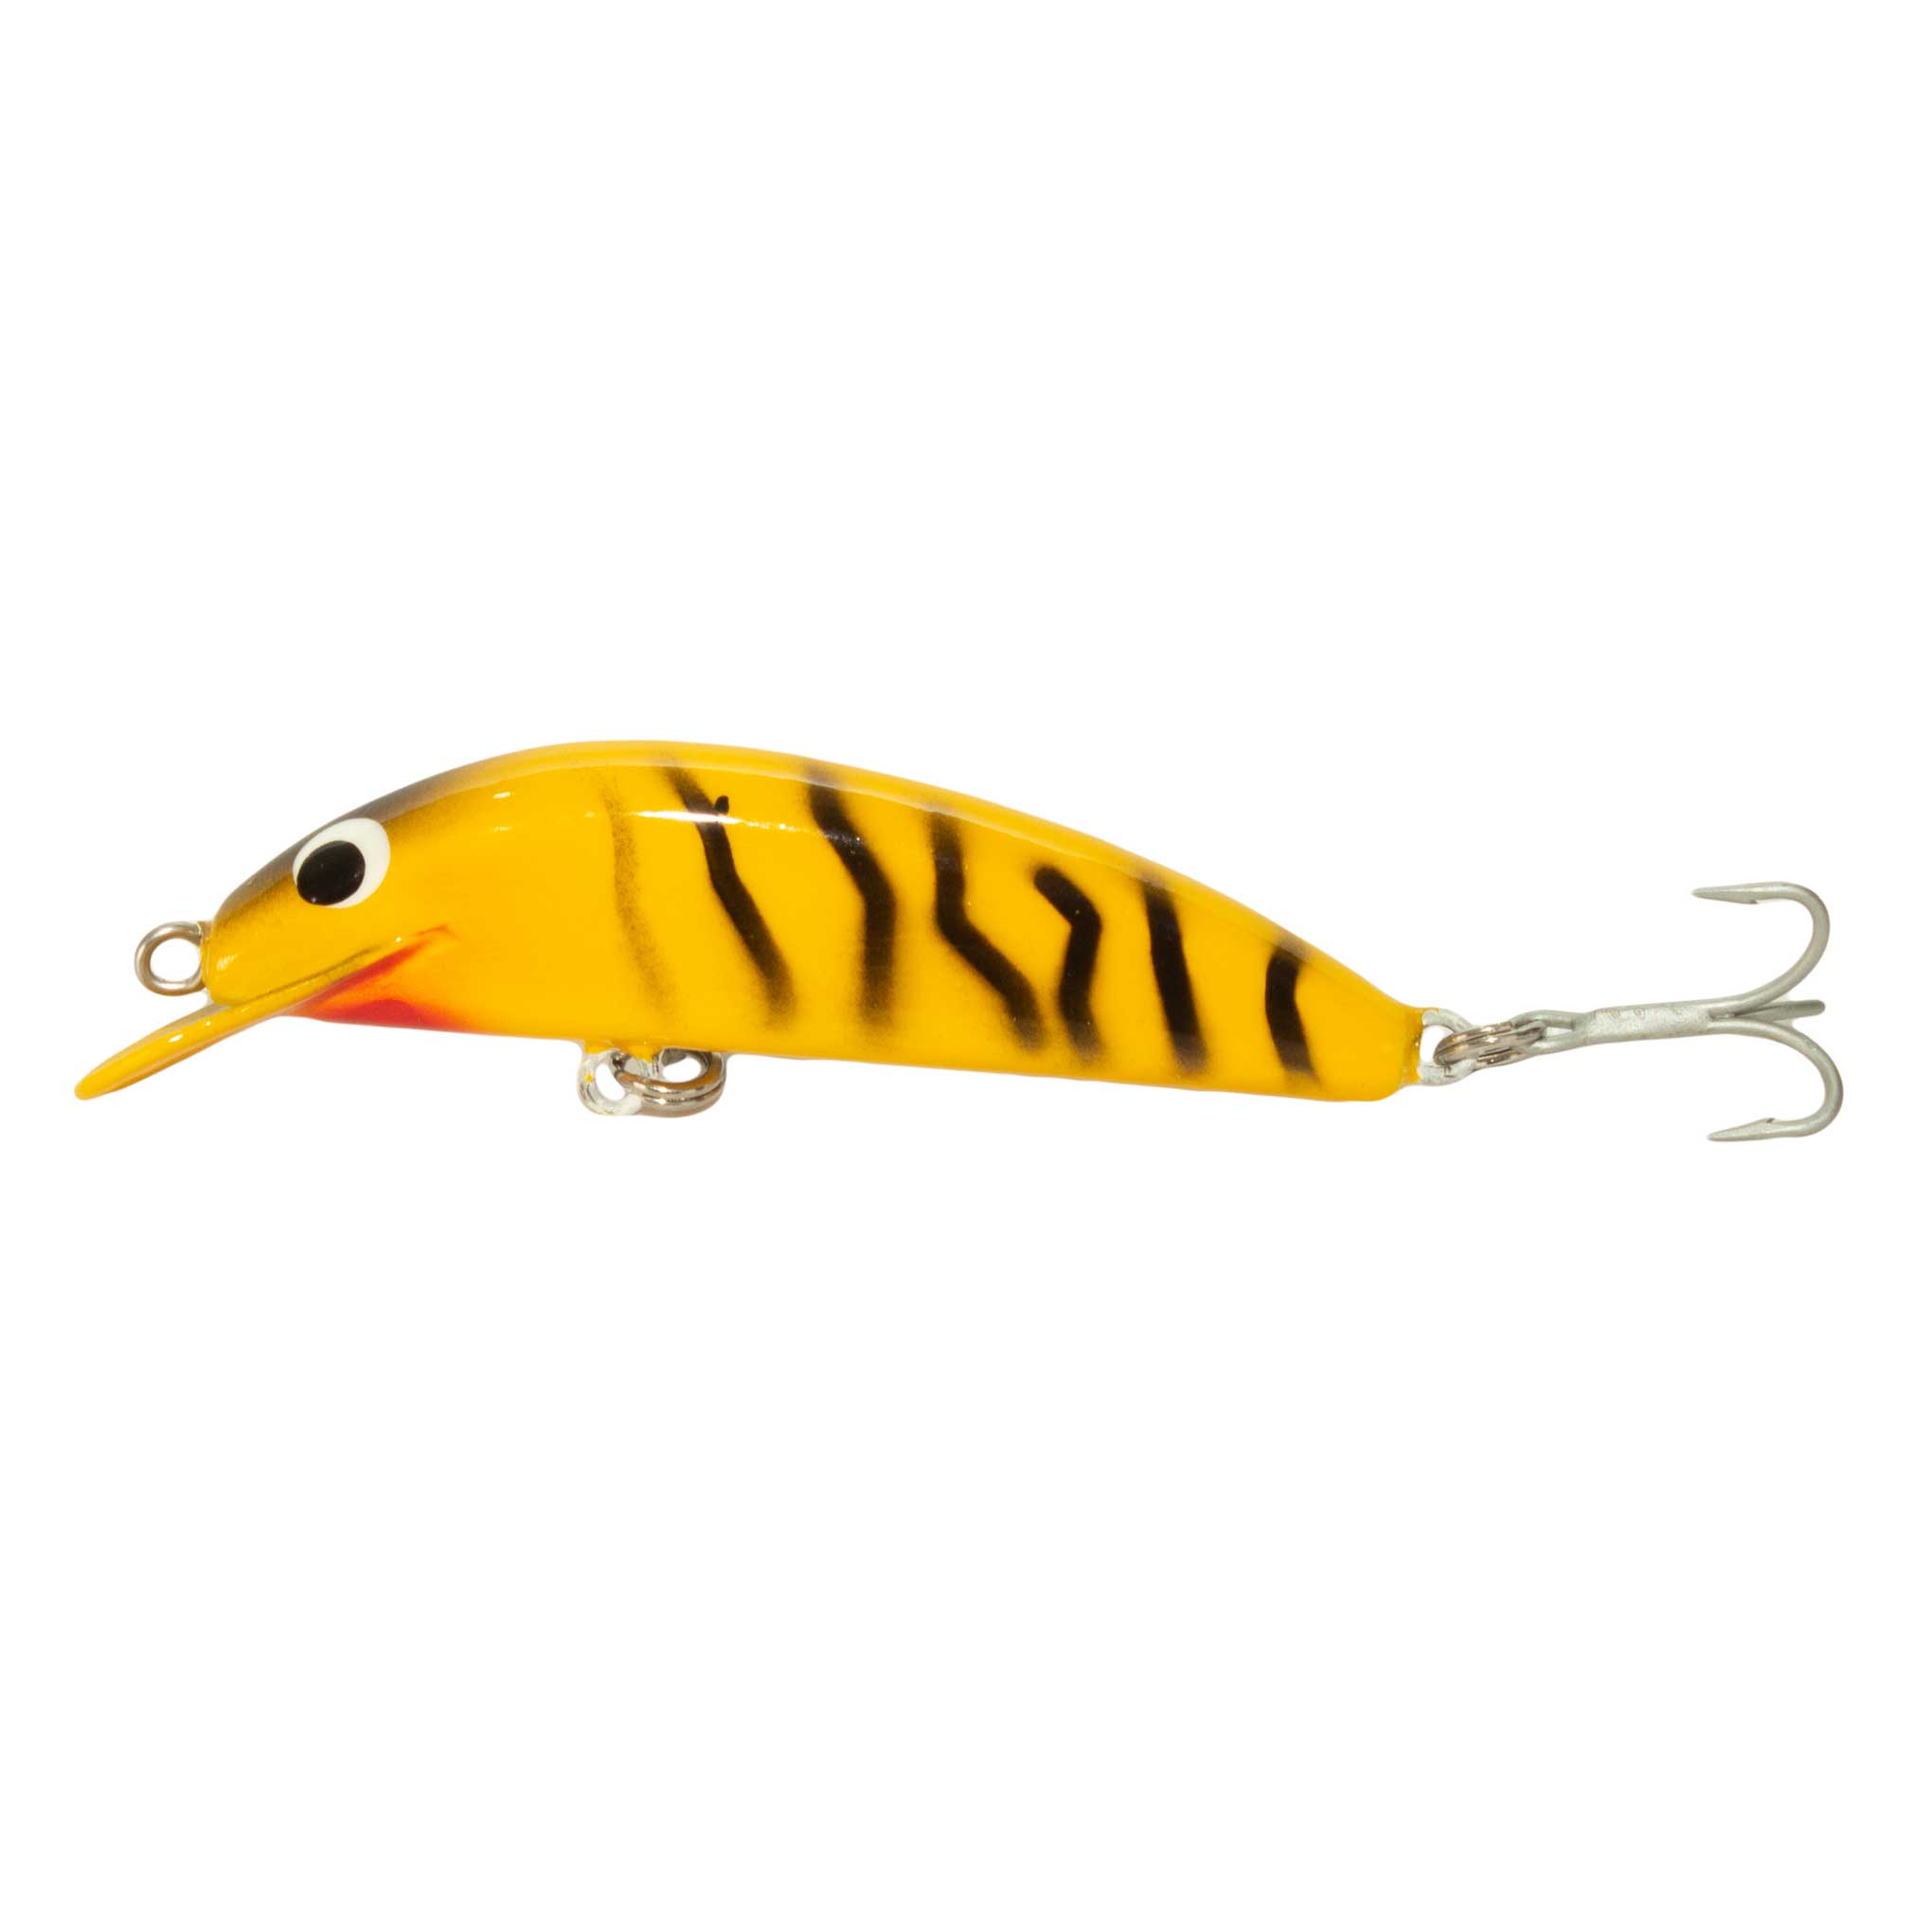 Barra Snax - 80mm handcrafted wooden fishing lure - Old Dog Lures